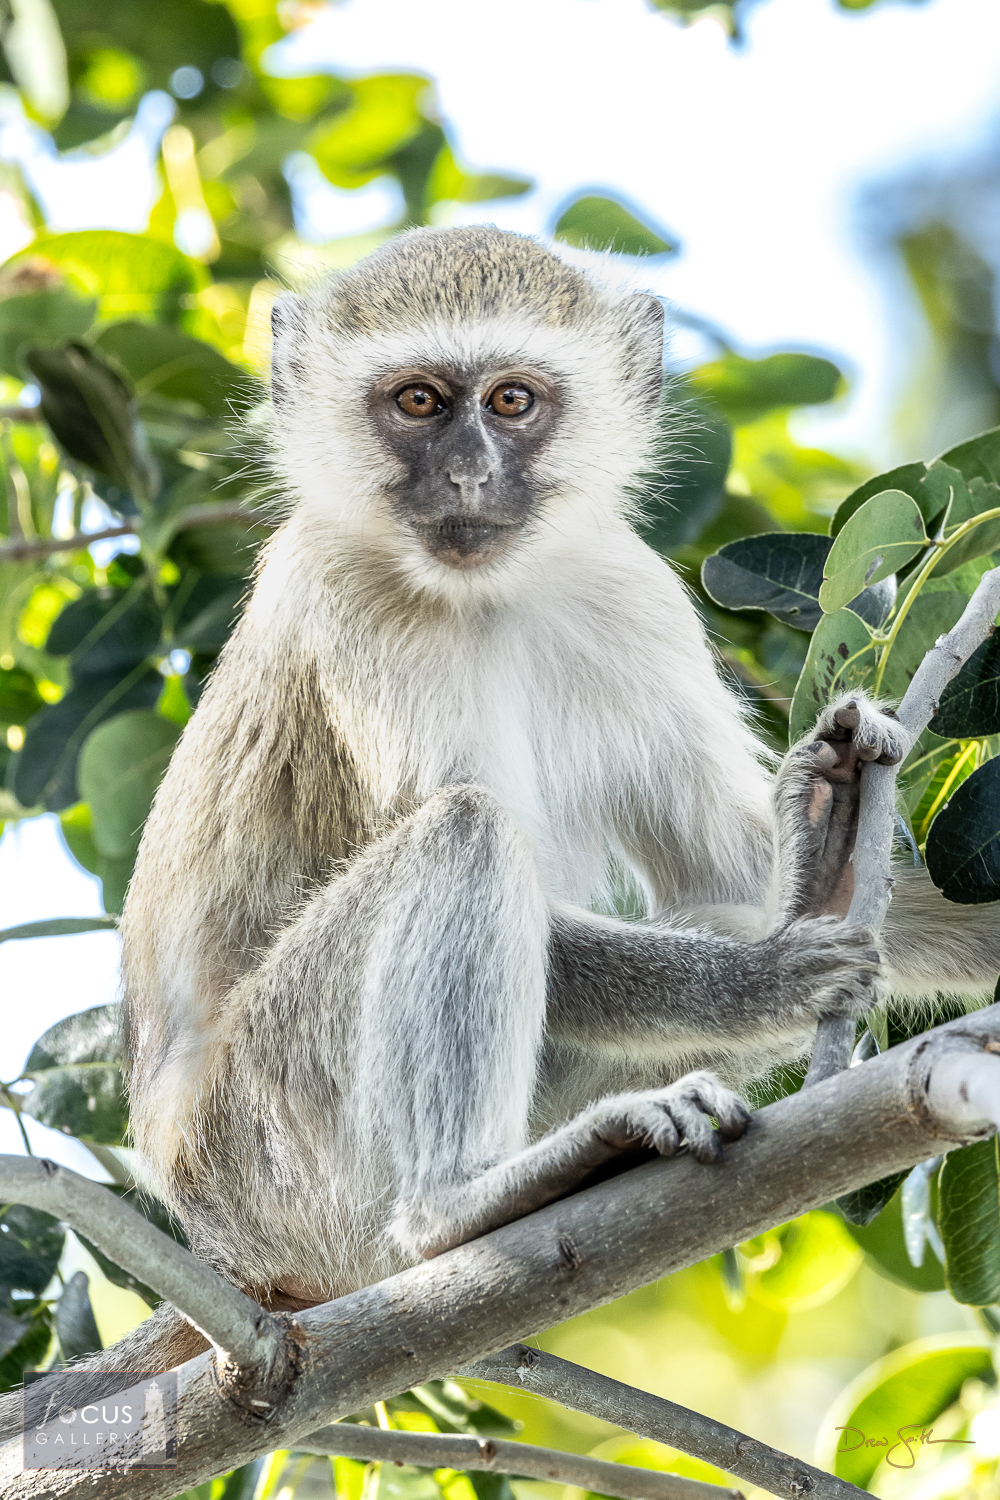 Vervet monkeys are quite cute, but also quite troublesome!  This one was keenly watching us, hoping it could outsmart us with...